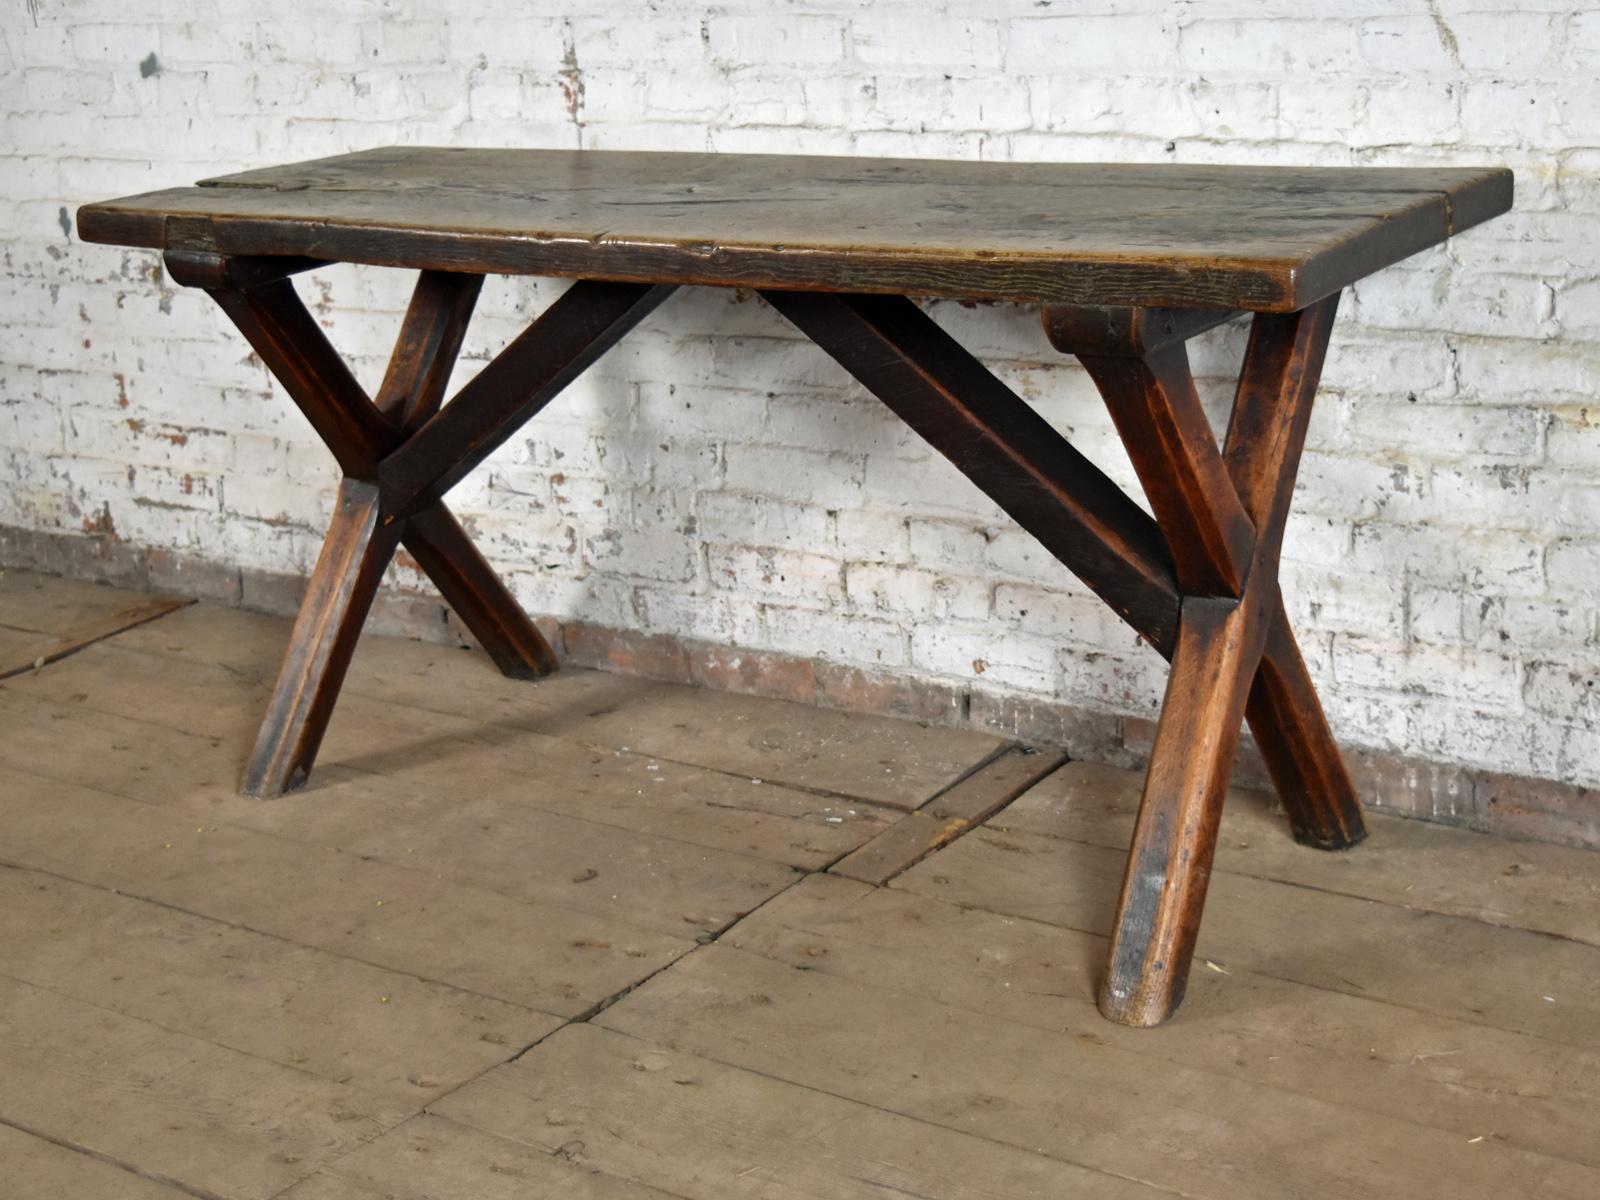 Unique, charming rustic console table of interesting, linear design, featuring an oak trestle base constructed of chamfered X-form legs and conforming middle supports for the thick elm top. 
The table has been left in 